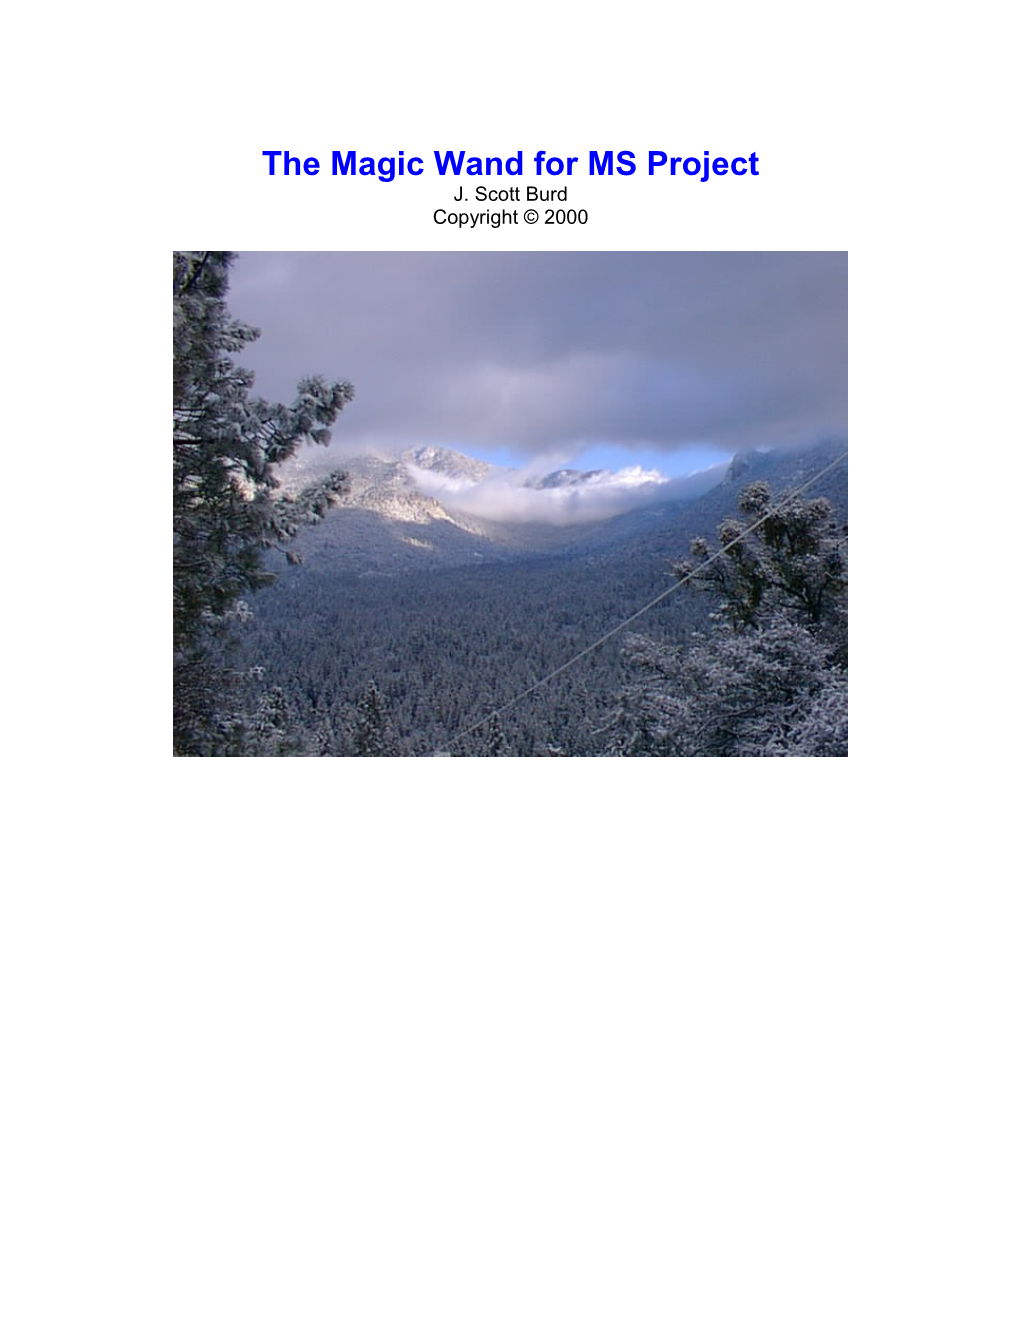 The Magic Wand for MS Project